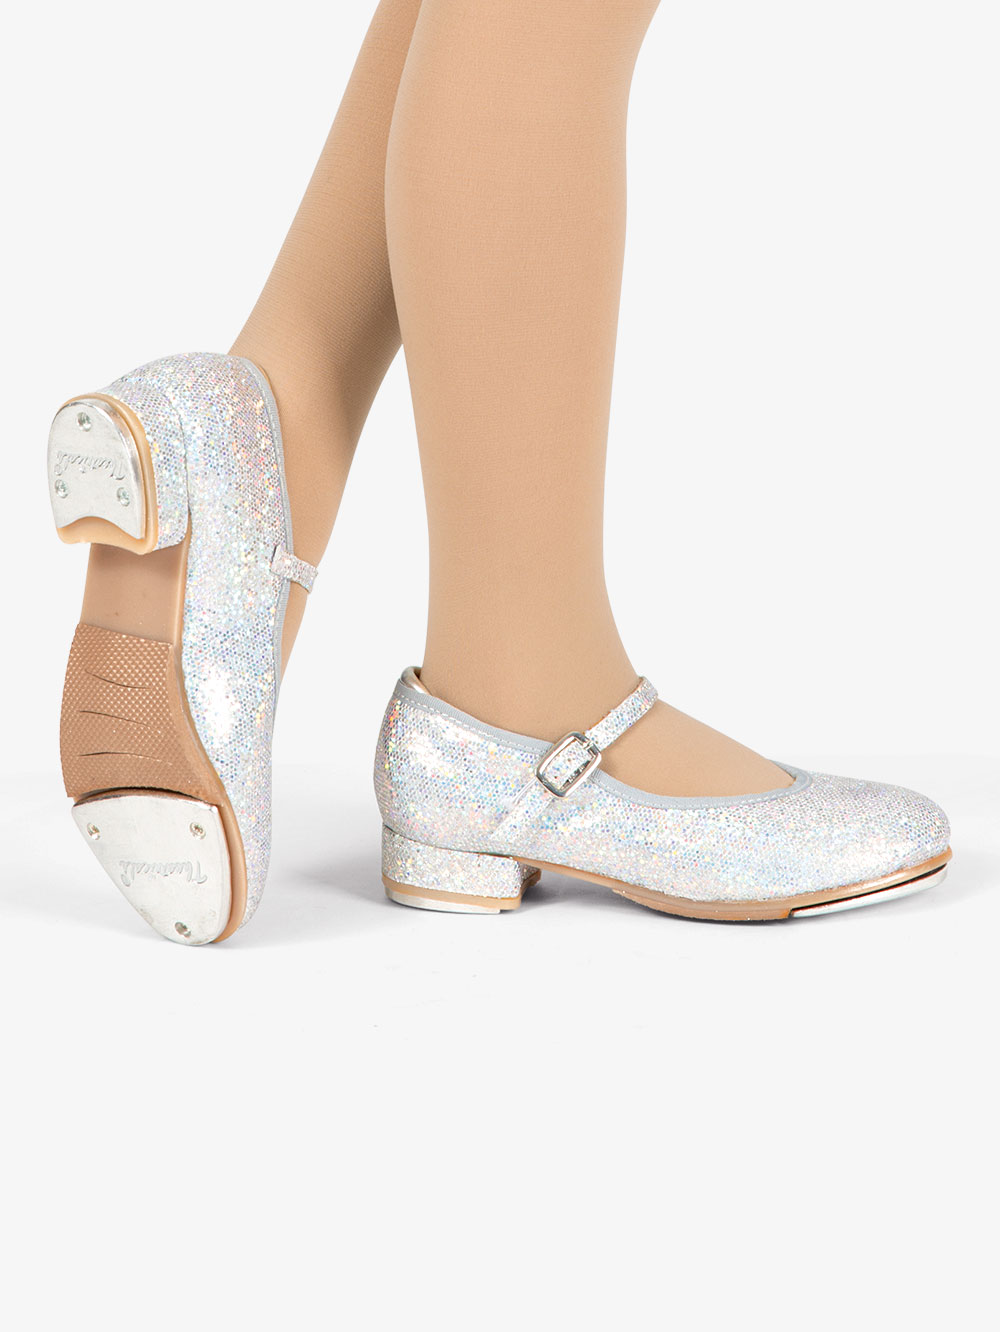 theatricals tap shoes